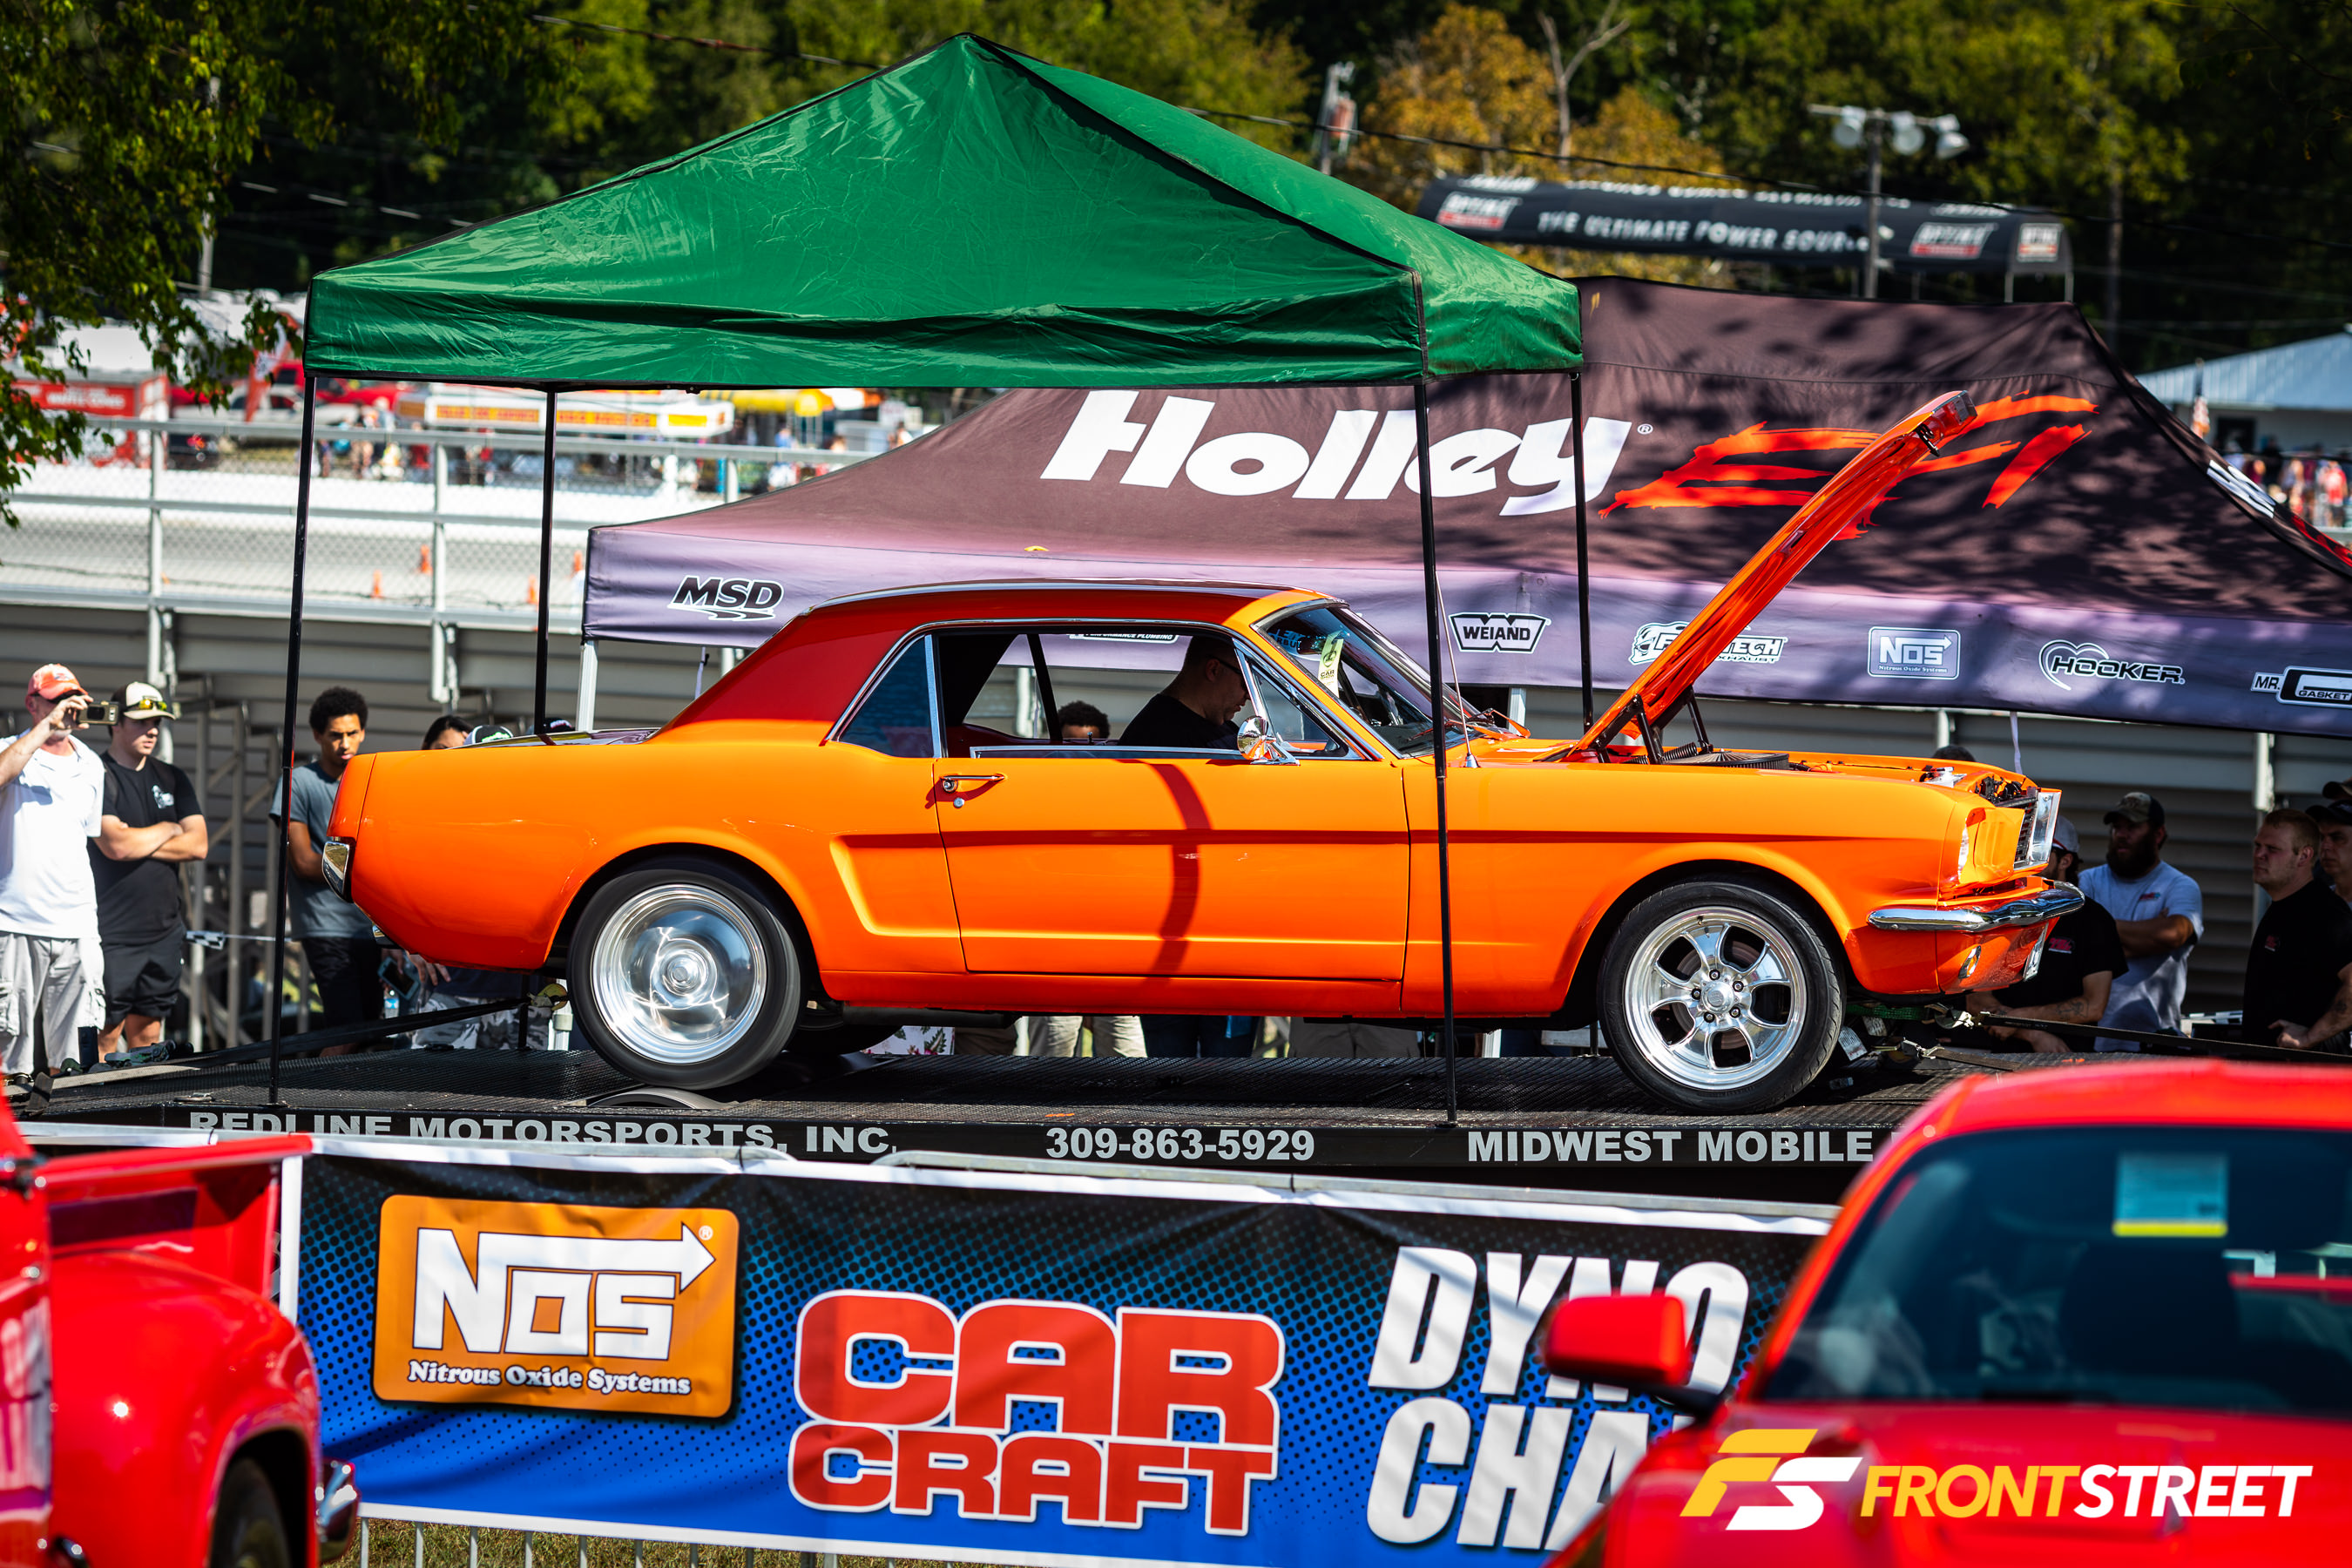 The NMRA World Finals Return To Bowling Green—With A Twist